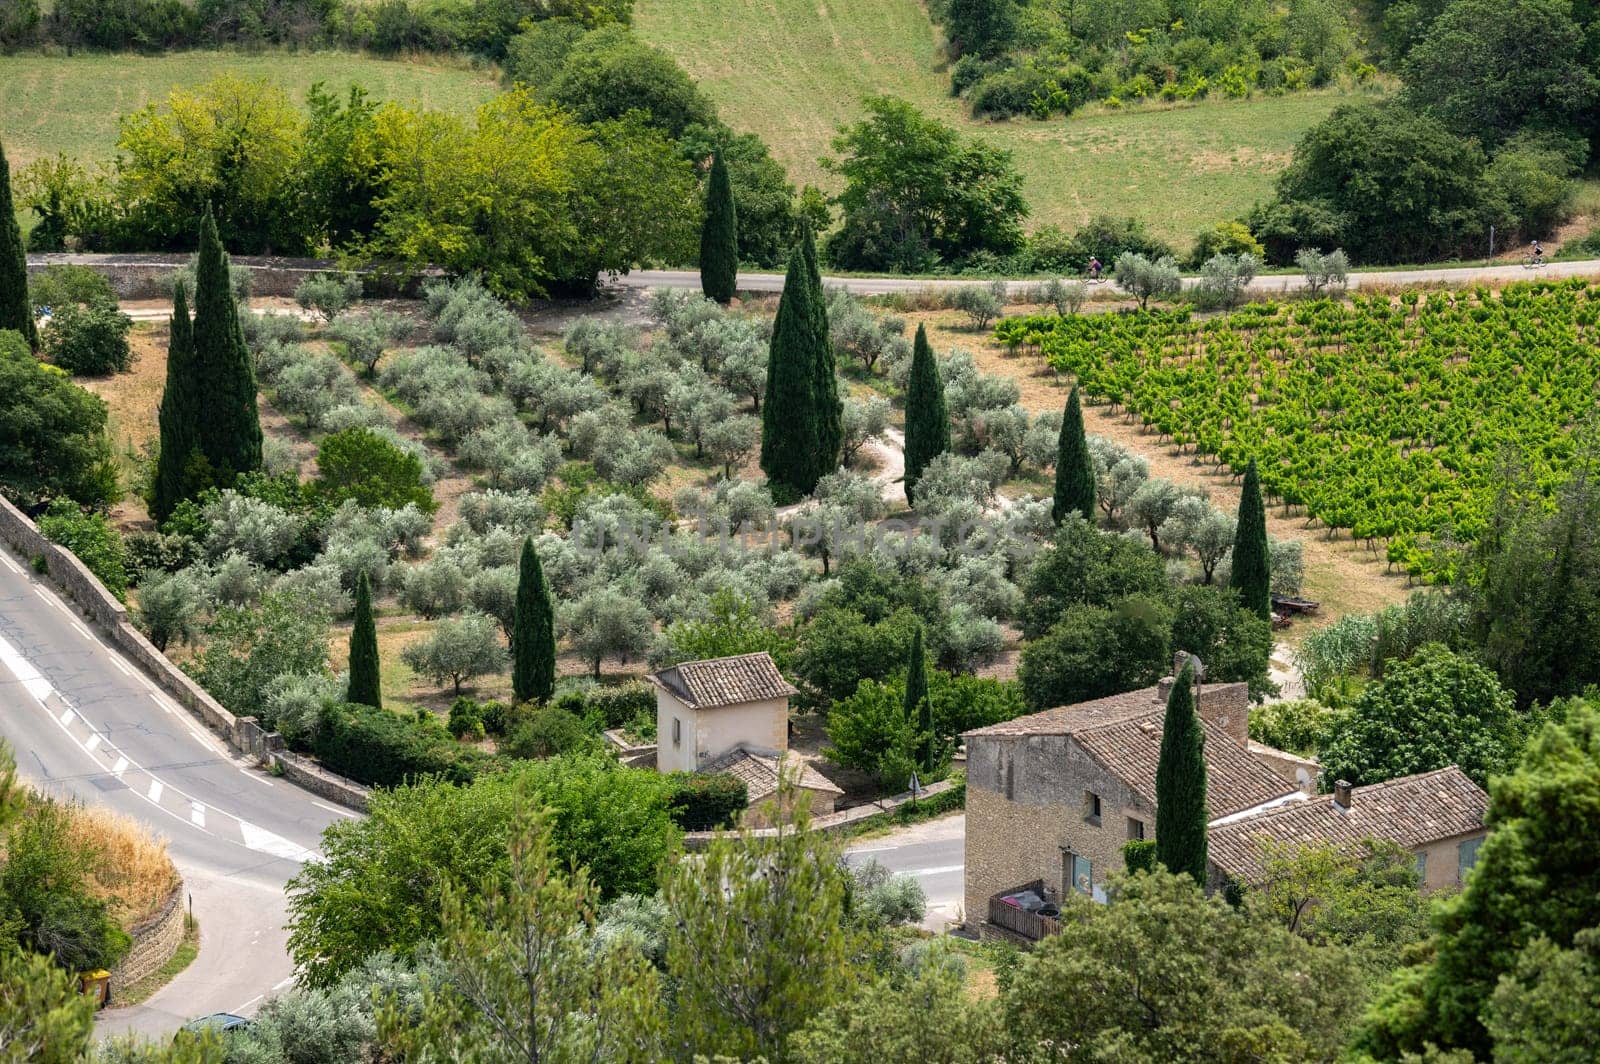 View of Field of olive trees and cypresses below the village of Gordes, Vaucluse, Provence, France, High quality photo